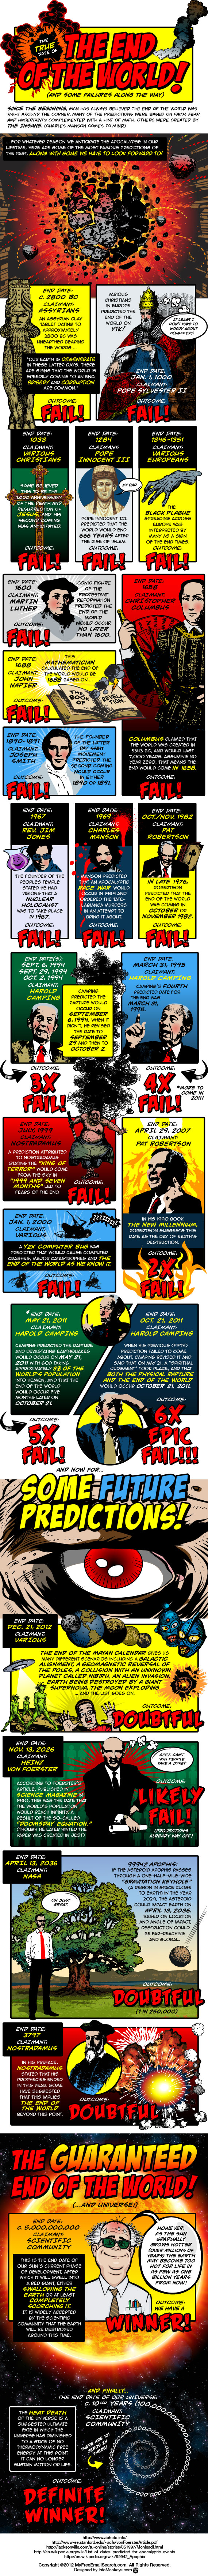 The Epic Failed Predictions For The End Of The World [Infographic]